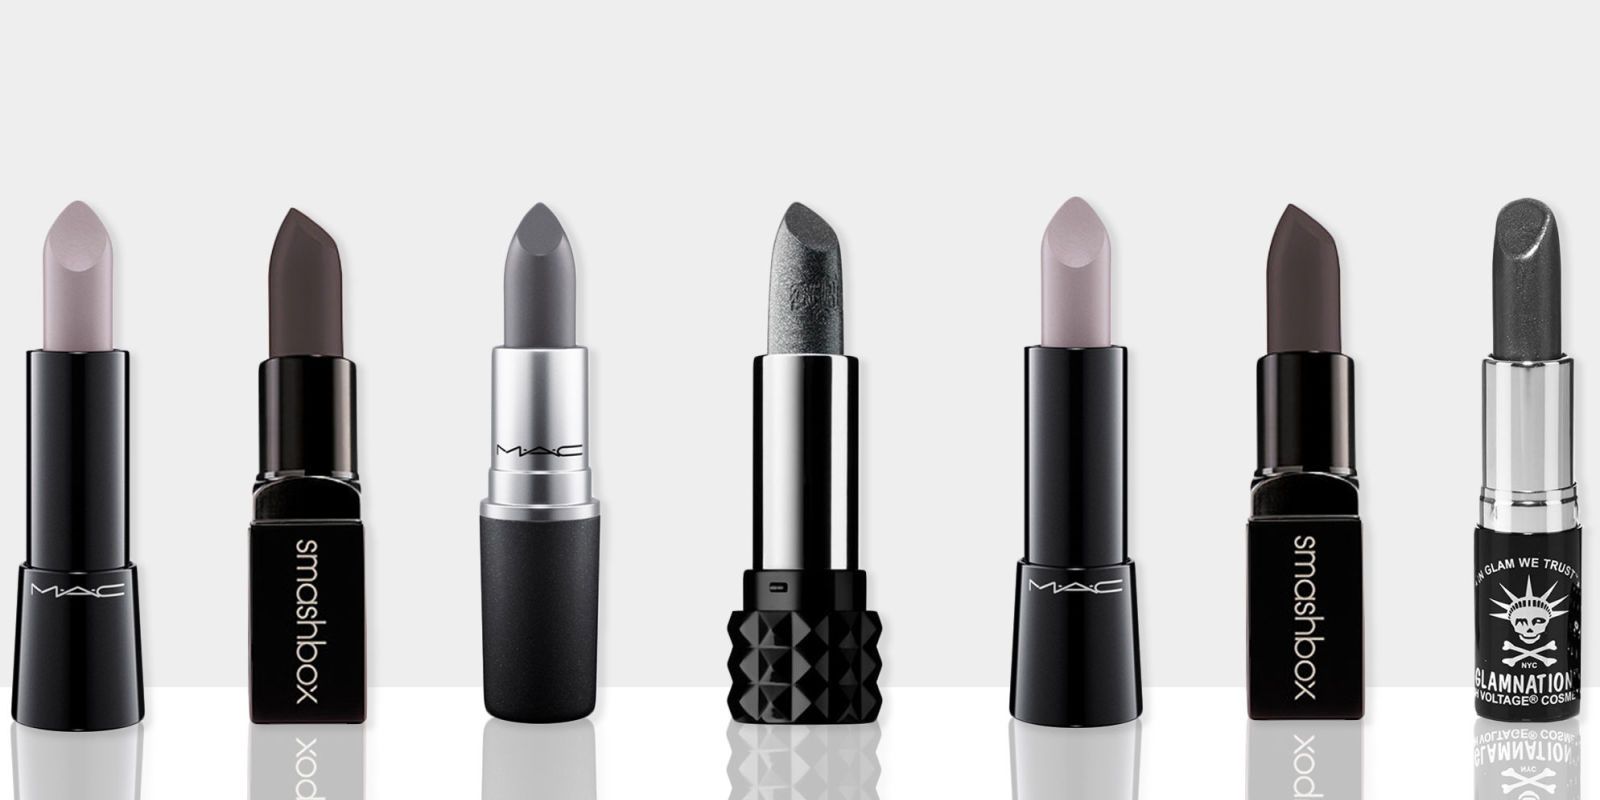 7 Best Gray Lipstick Shades 2018 - Our 